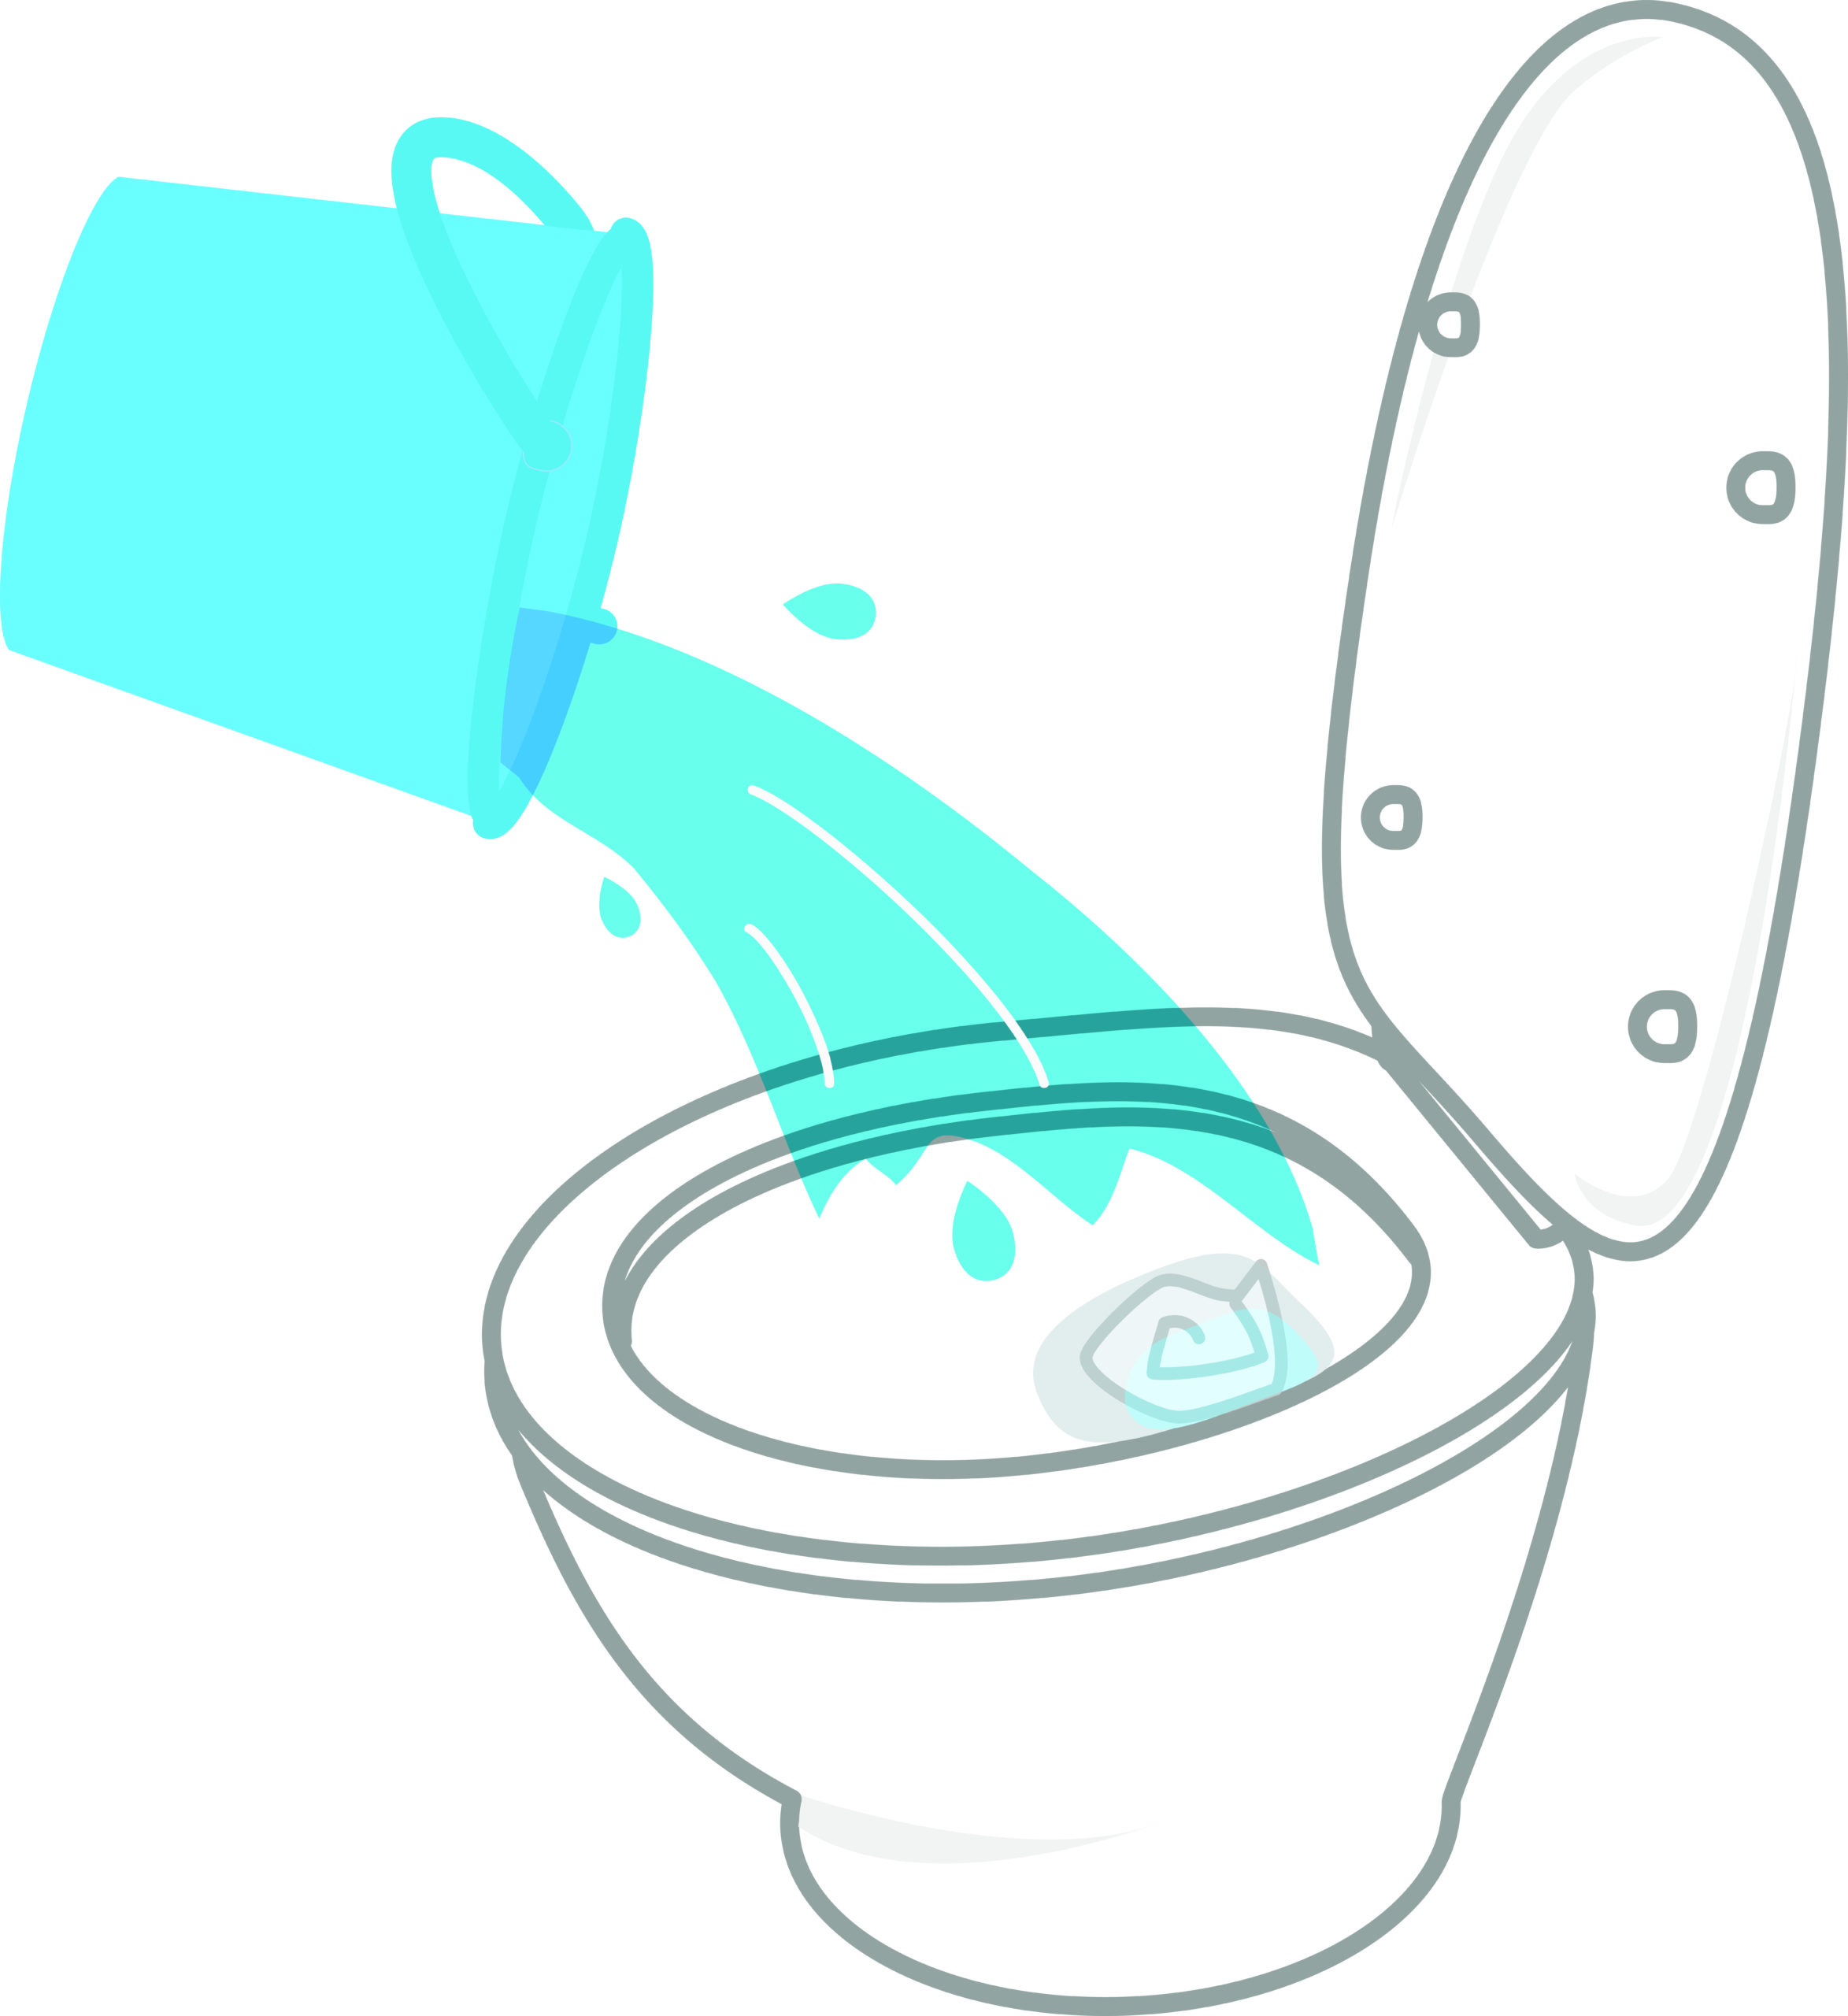 Toilet, flush with a bucket of water in an emergency